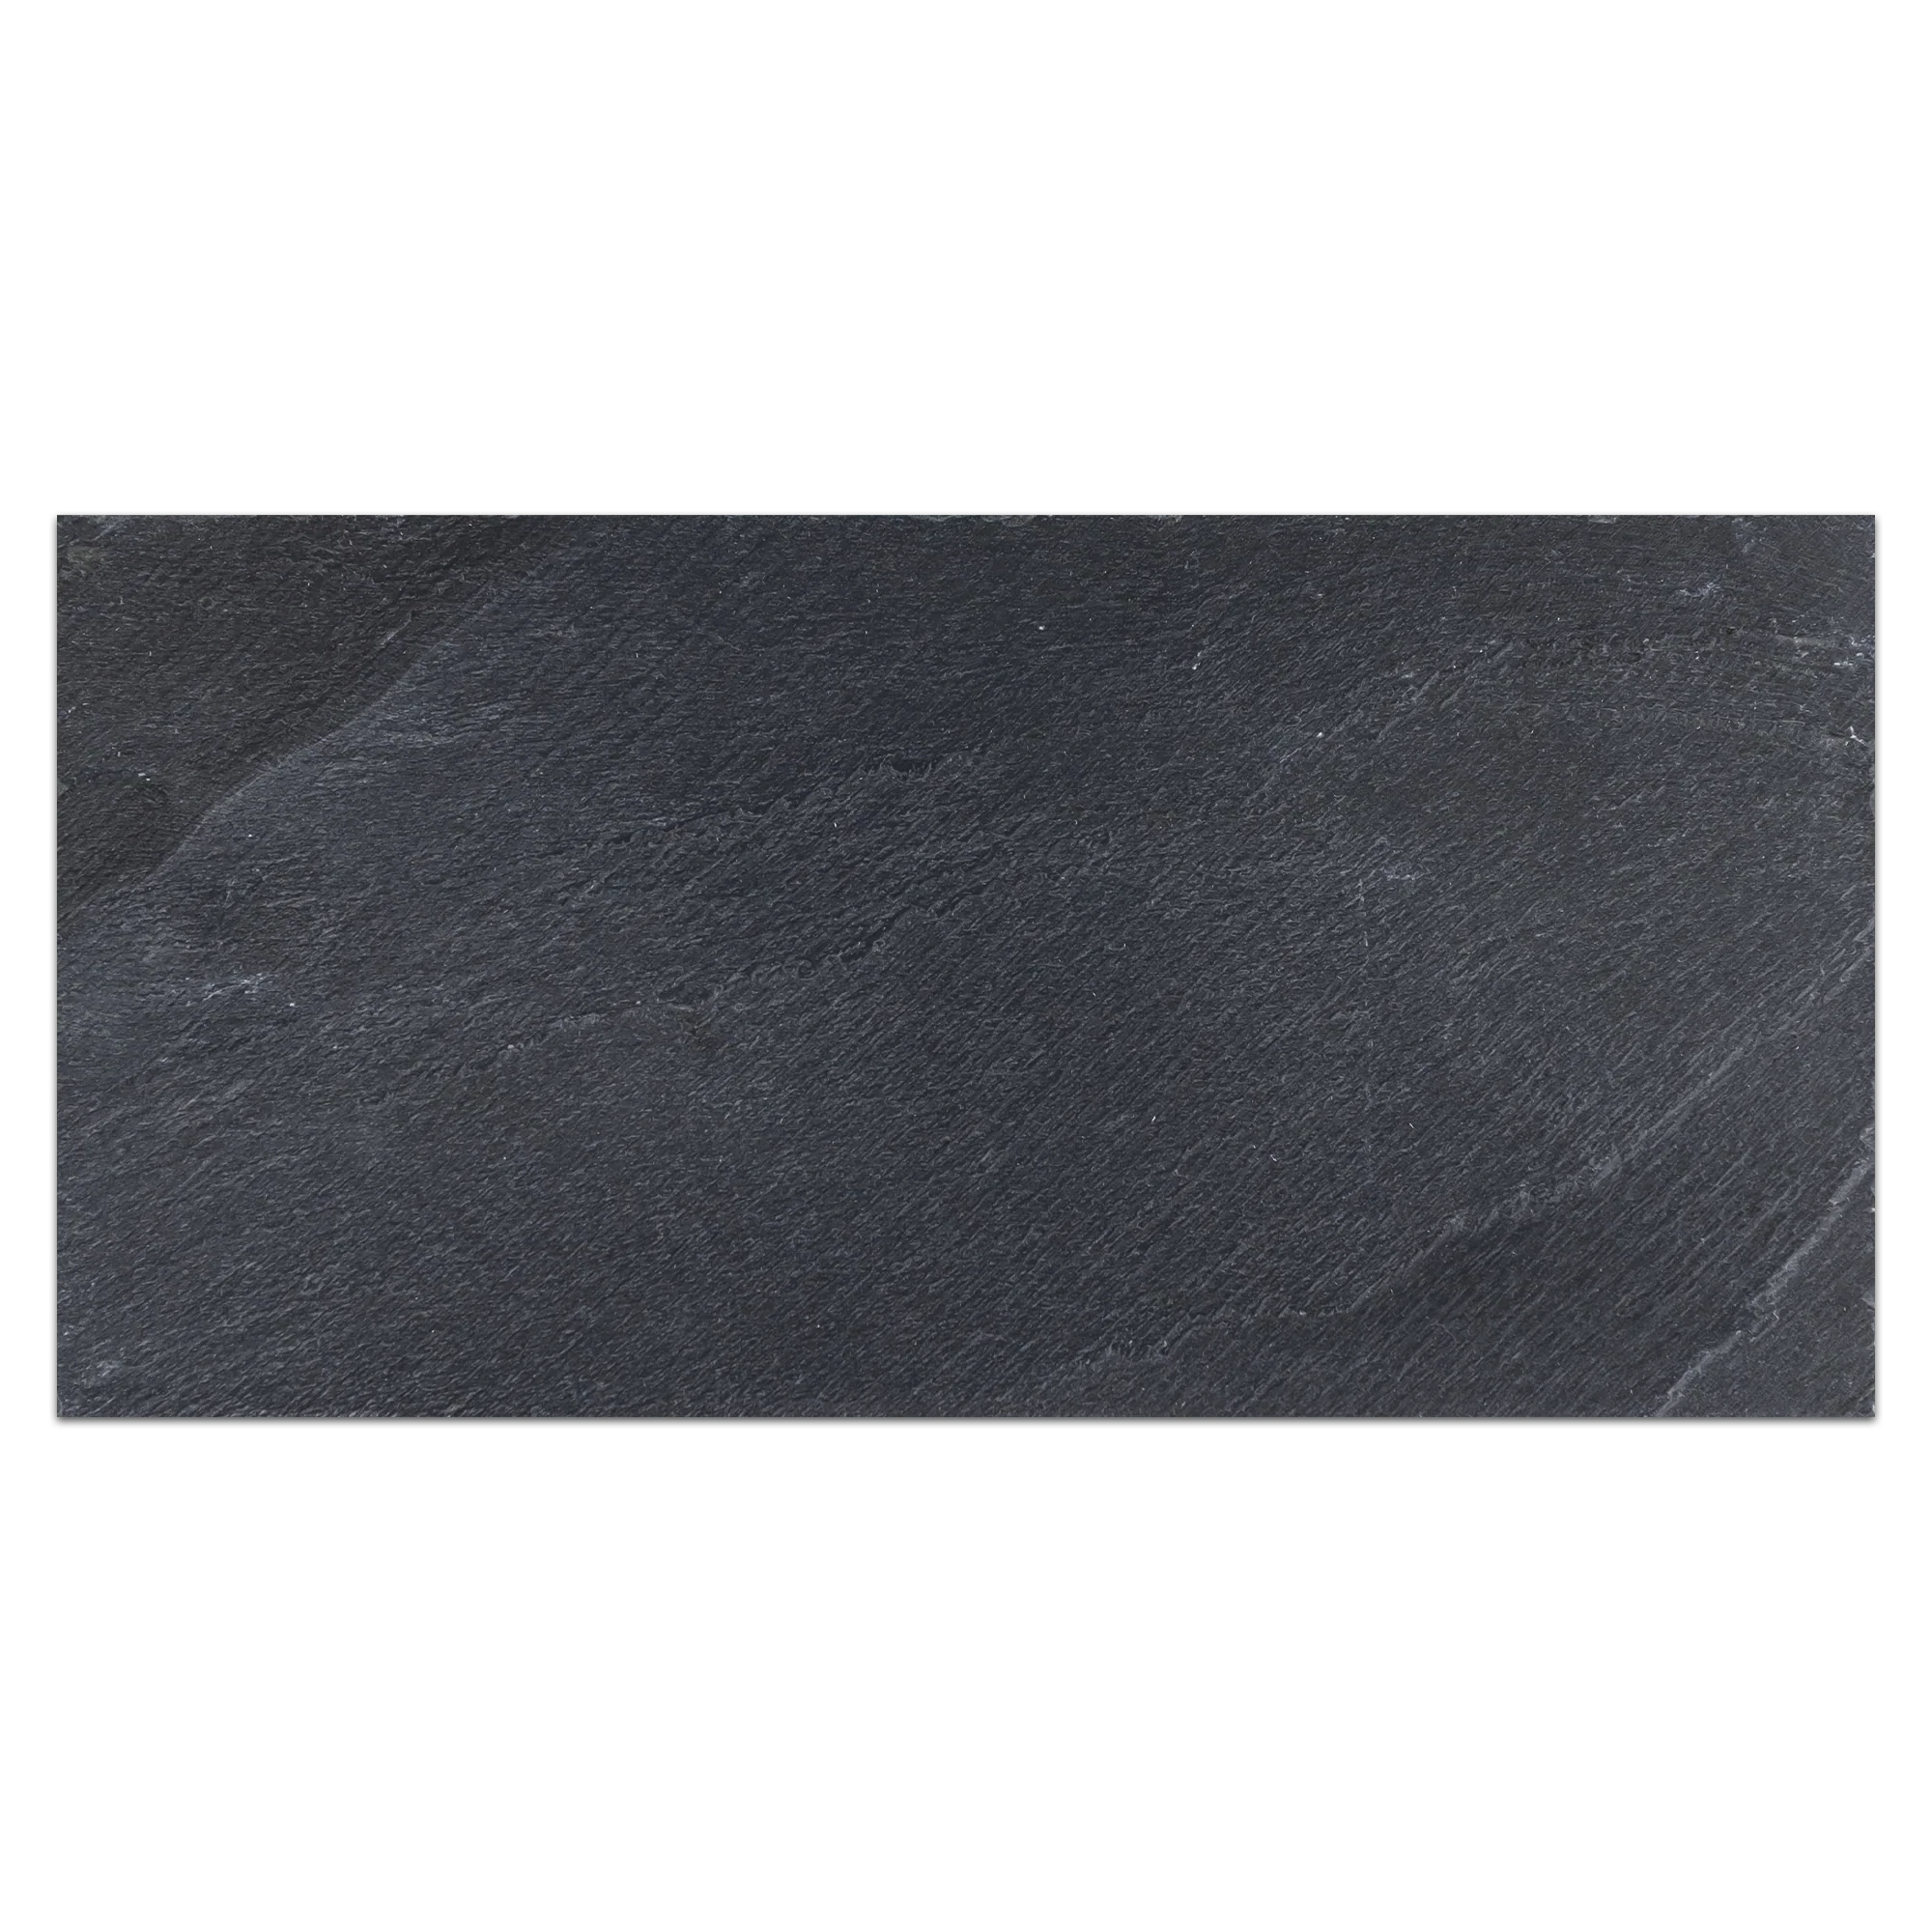 Elon Midnight Slate Rectangle Field Tile 12x24x0.375 Brushed SL1620BR Surface Group International Product